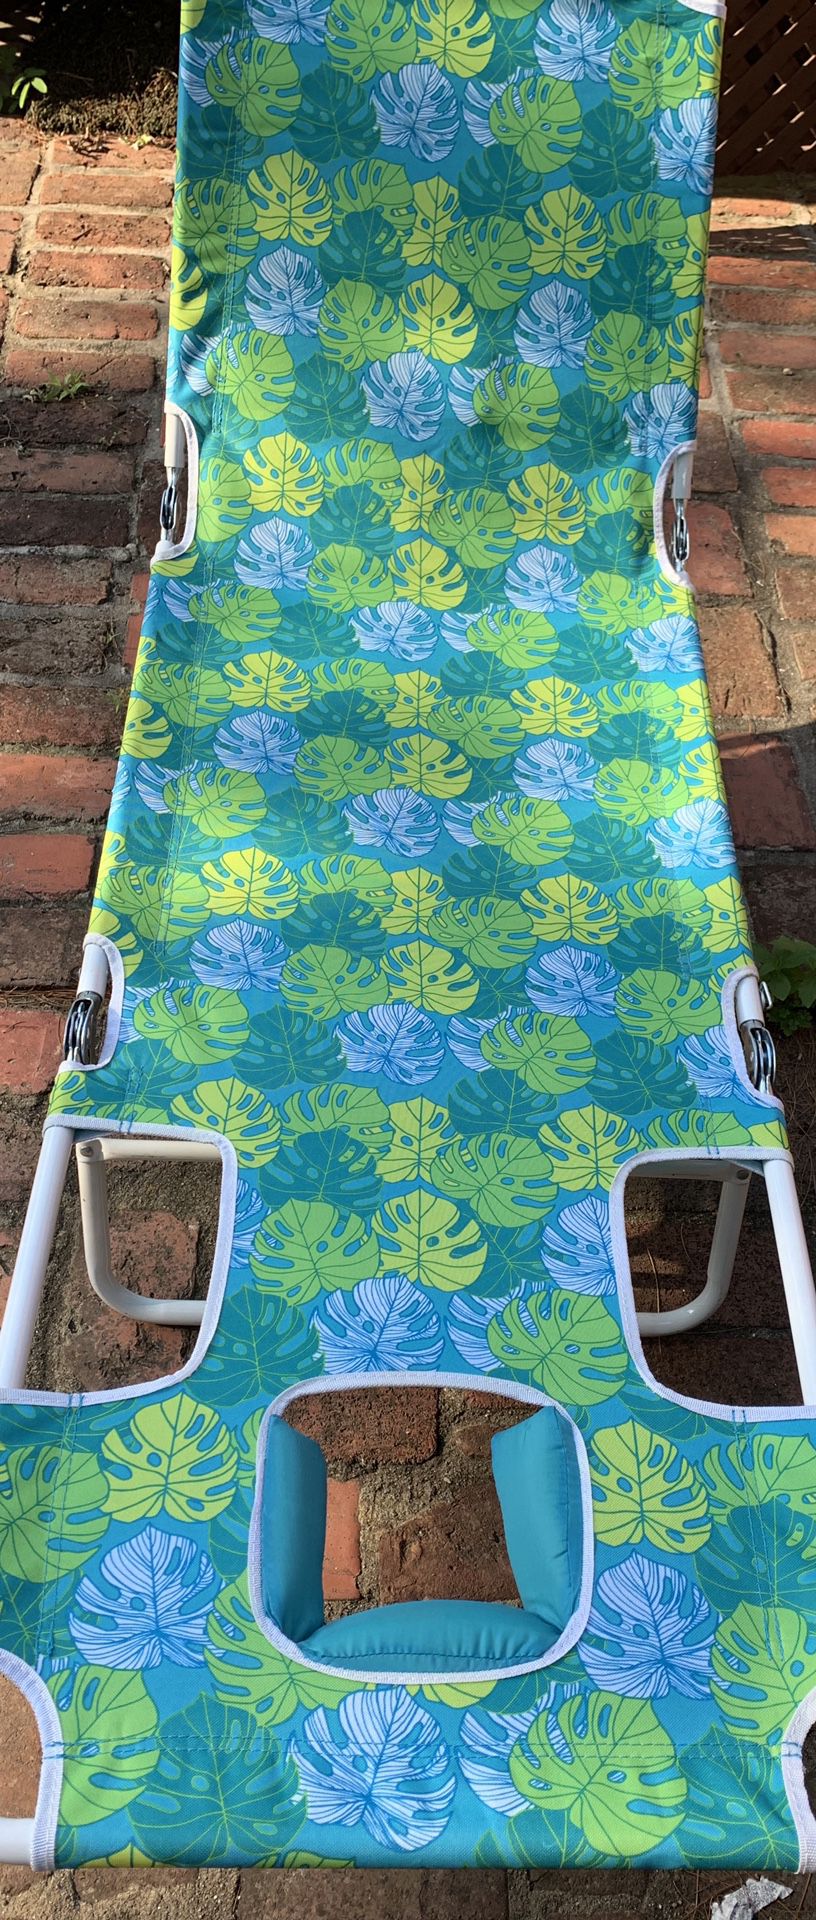 3 Misty Harbor Facedown Lounger, Cool Blue, including 10chairs.